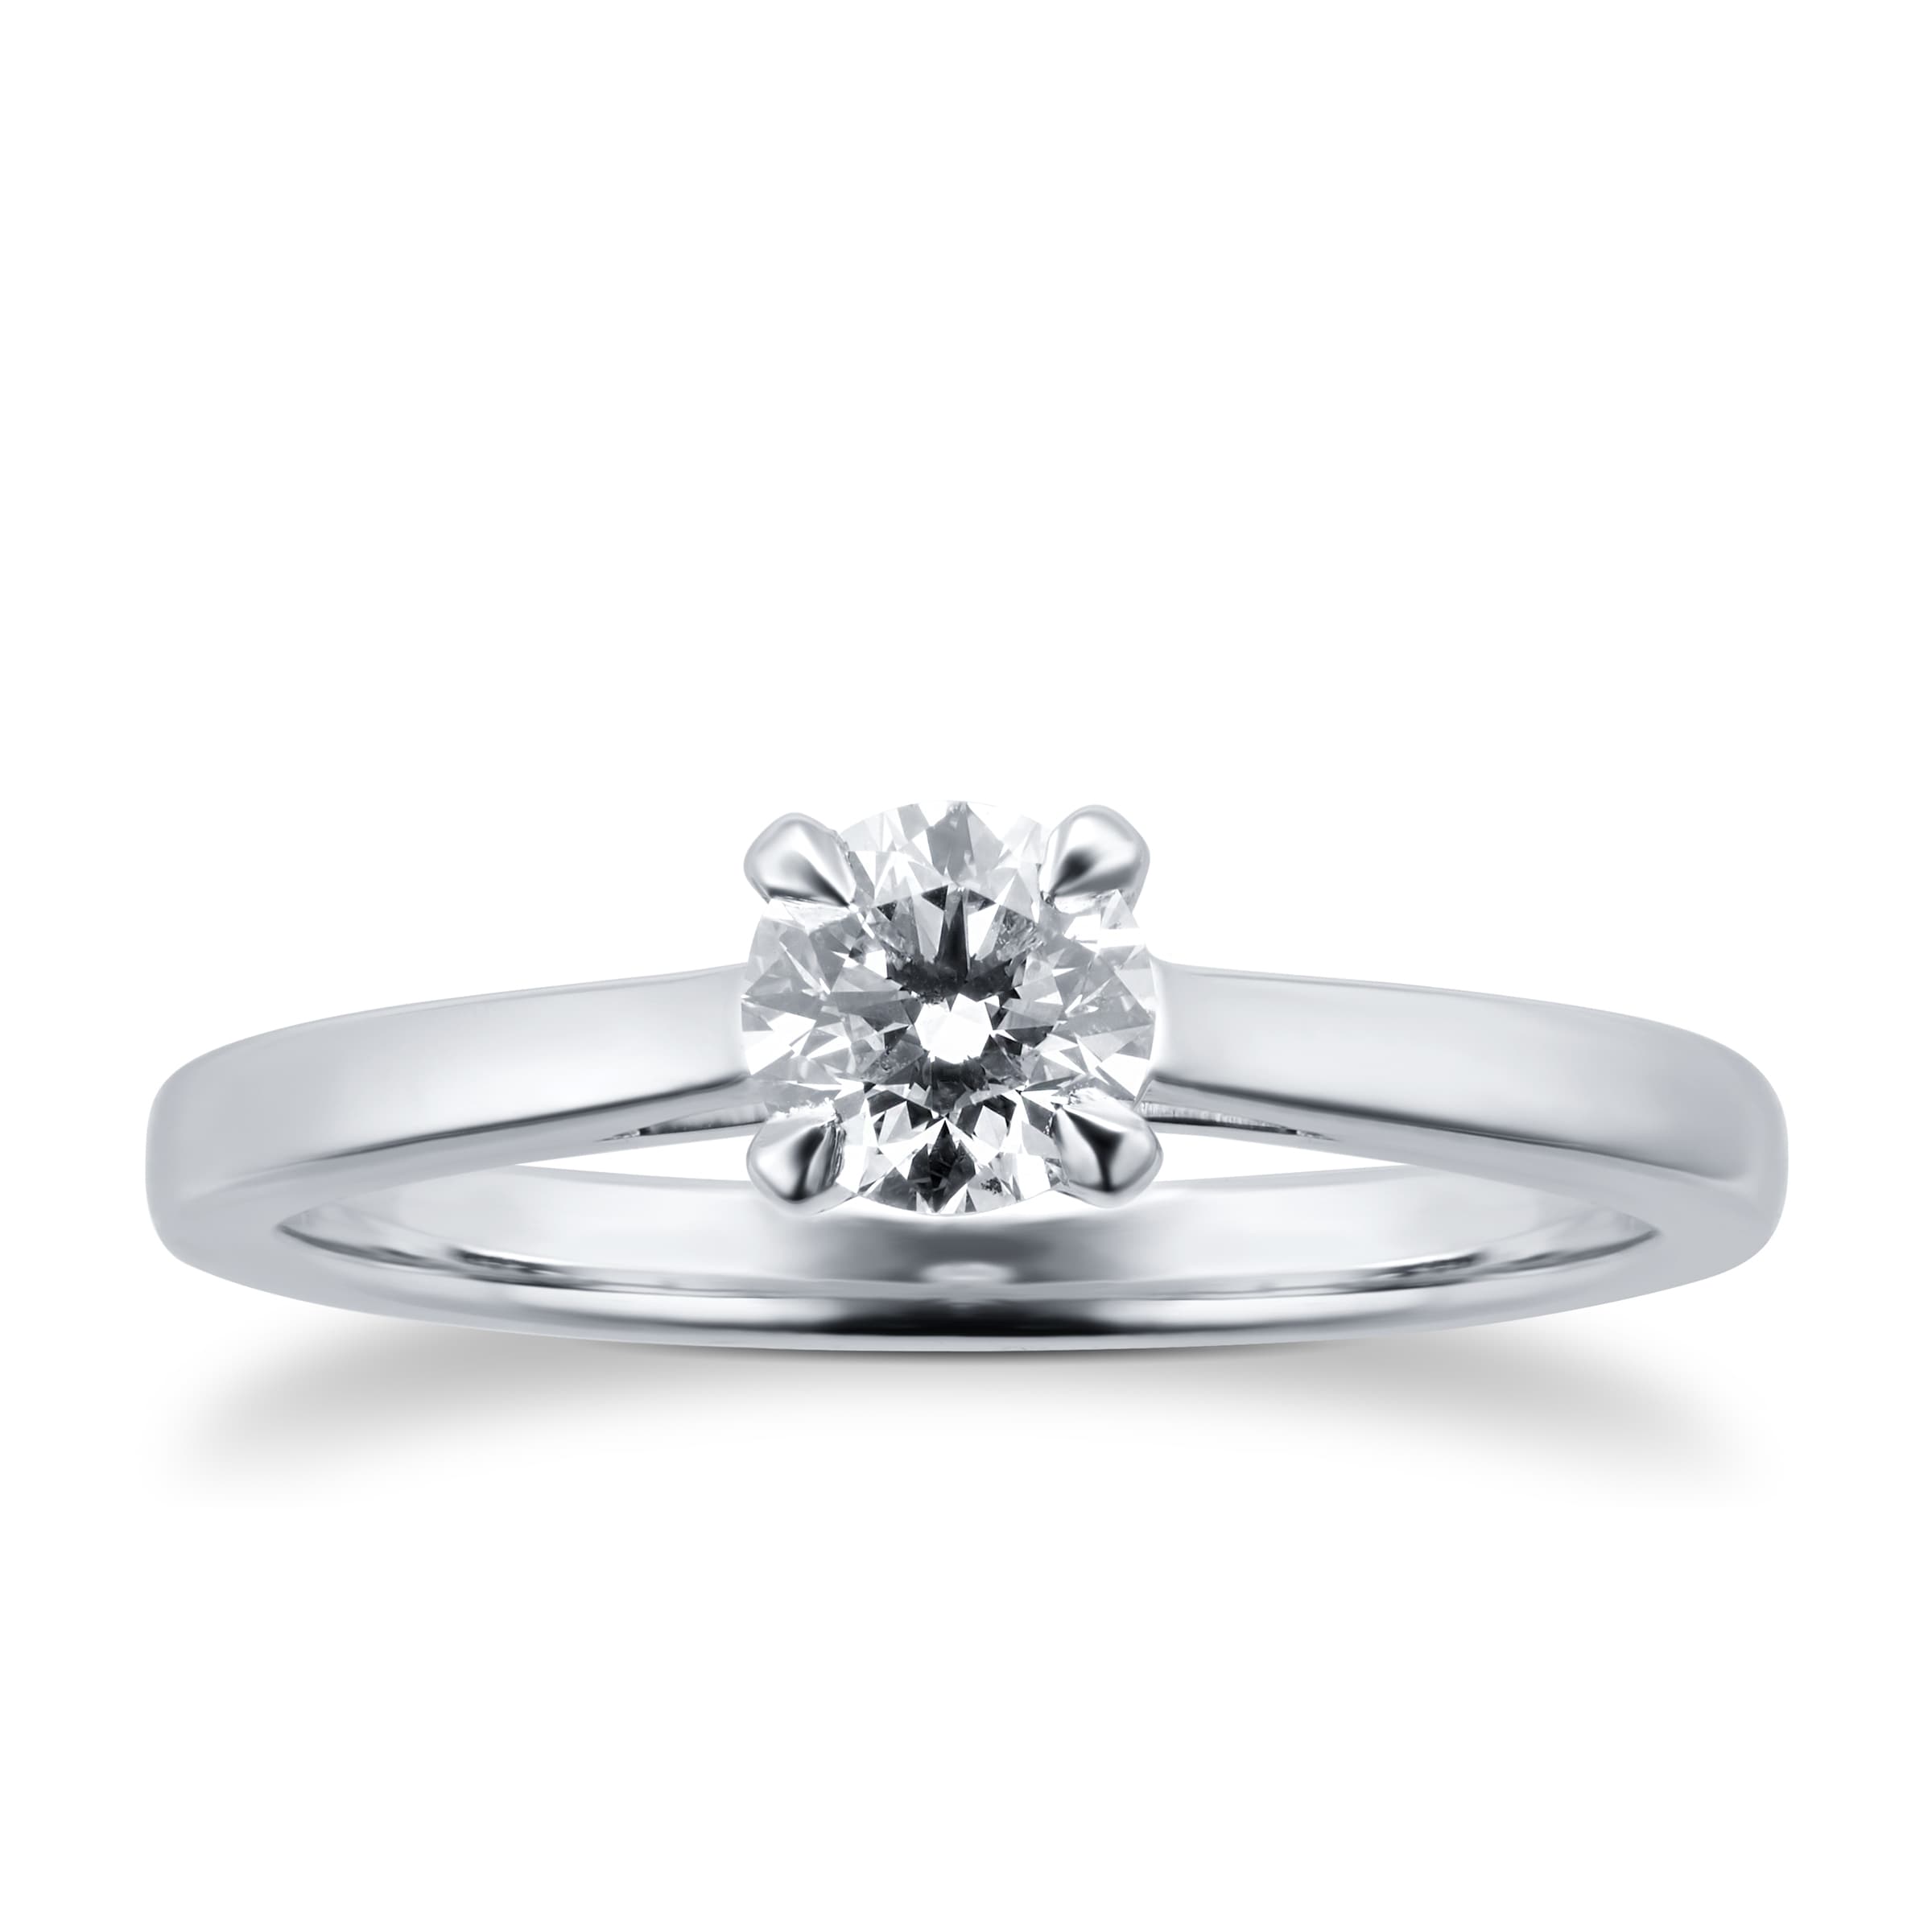 Top Engagement Ring Trends for 2021 | Guides for Brides